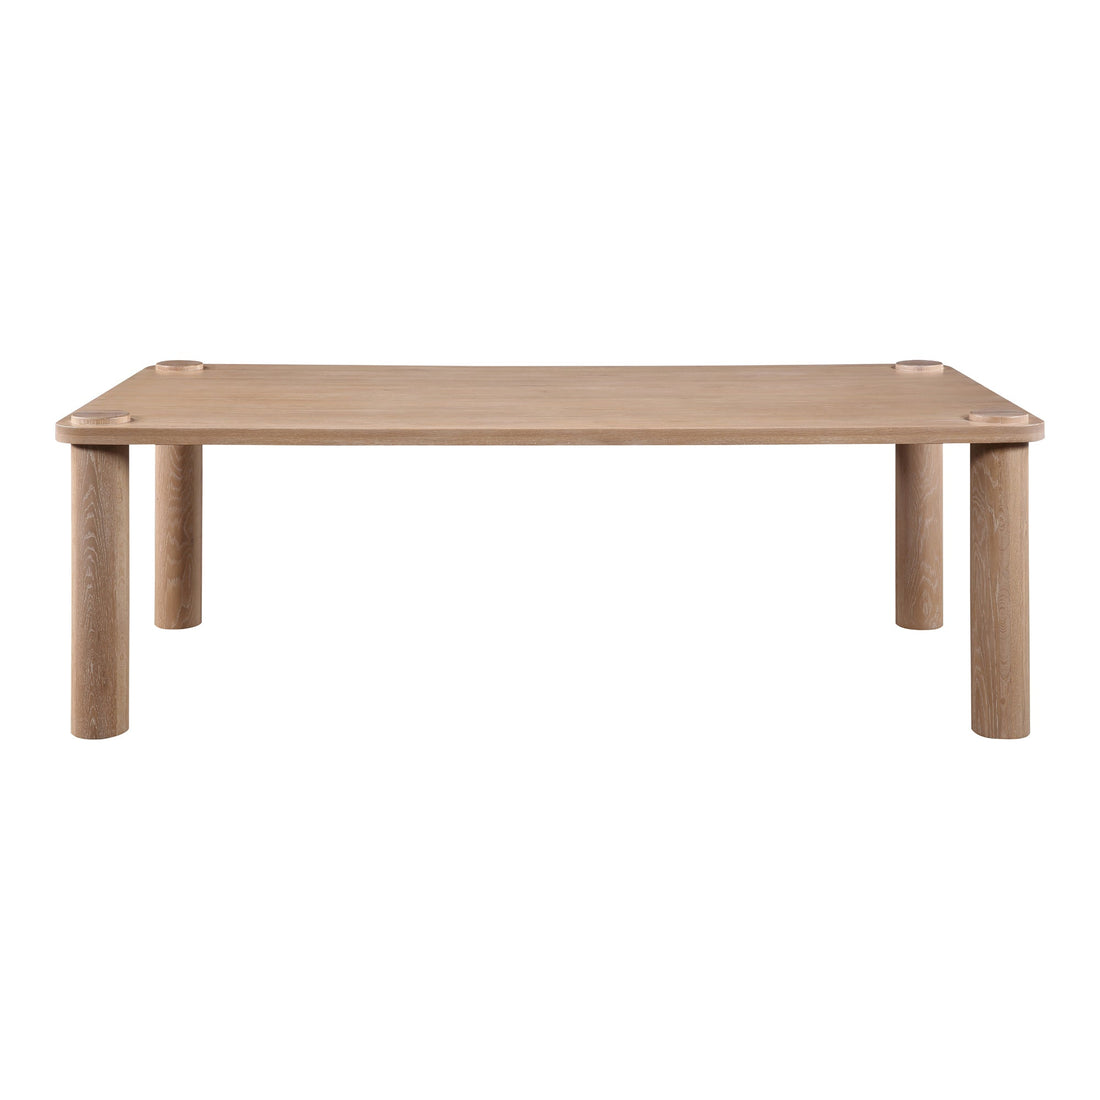 Century Dining Table 88W X 42D: A Modern Dining Statement